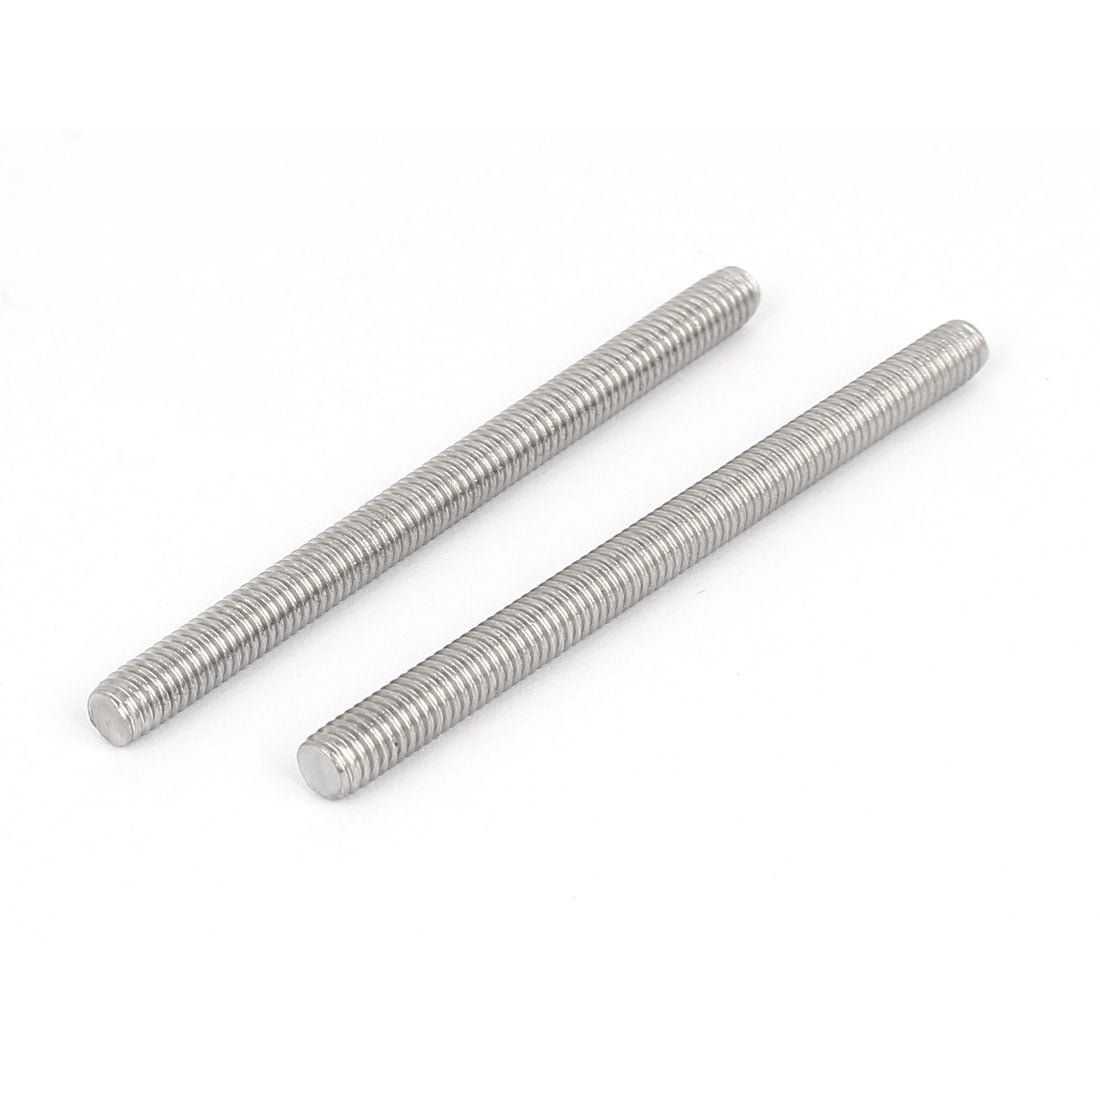 5mm ALUMINIUM Threaded Bar M5 Rod Stud Studding With or Without Nuts/Washers 